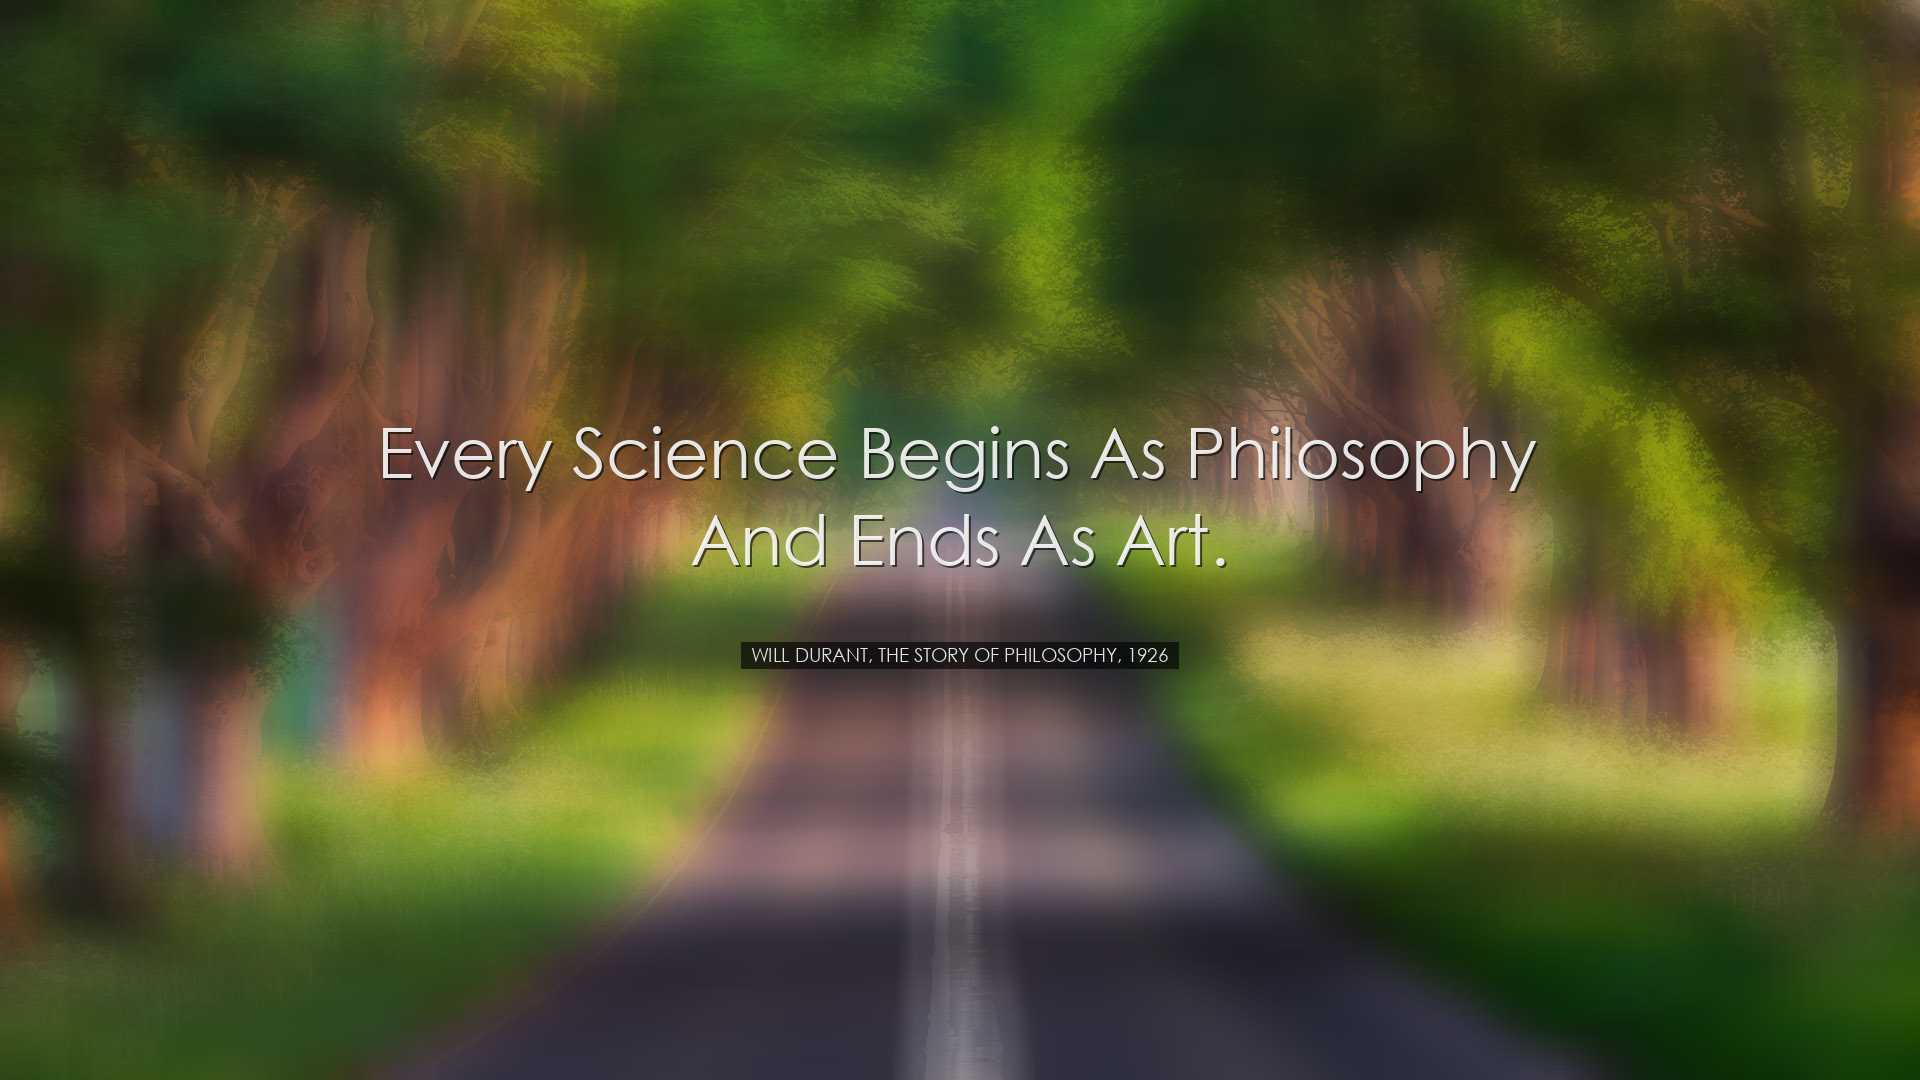 Every science begins as philosophy and ends as art. - Will Durant,